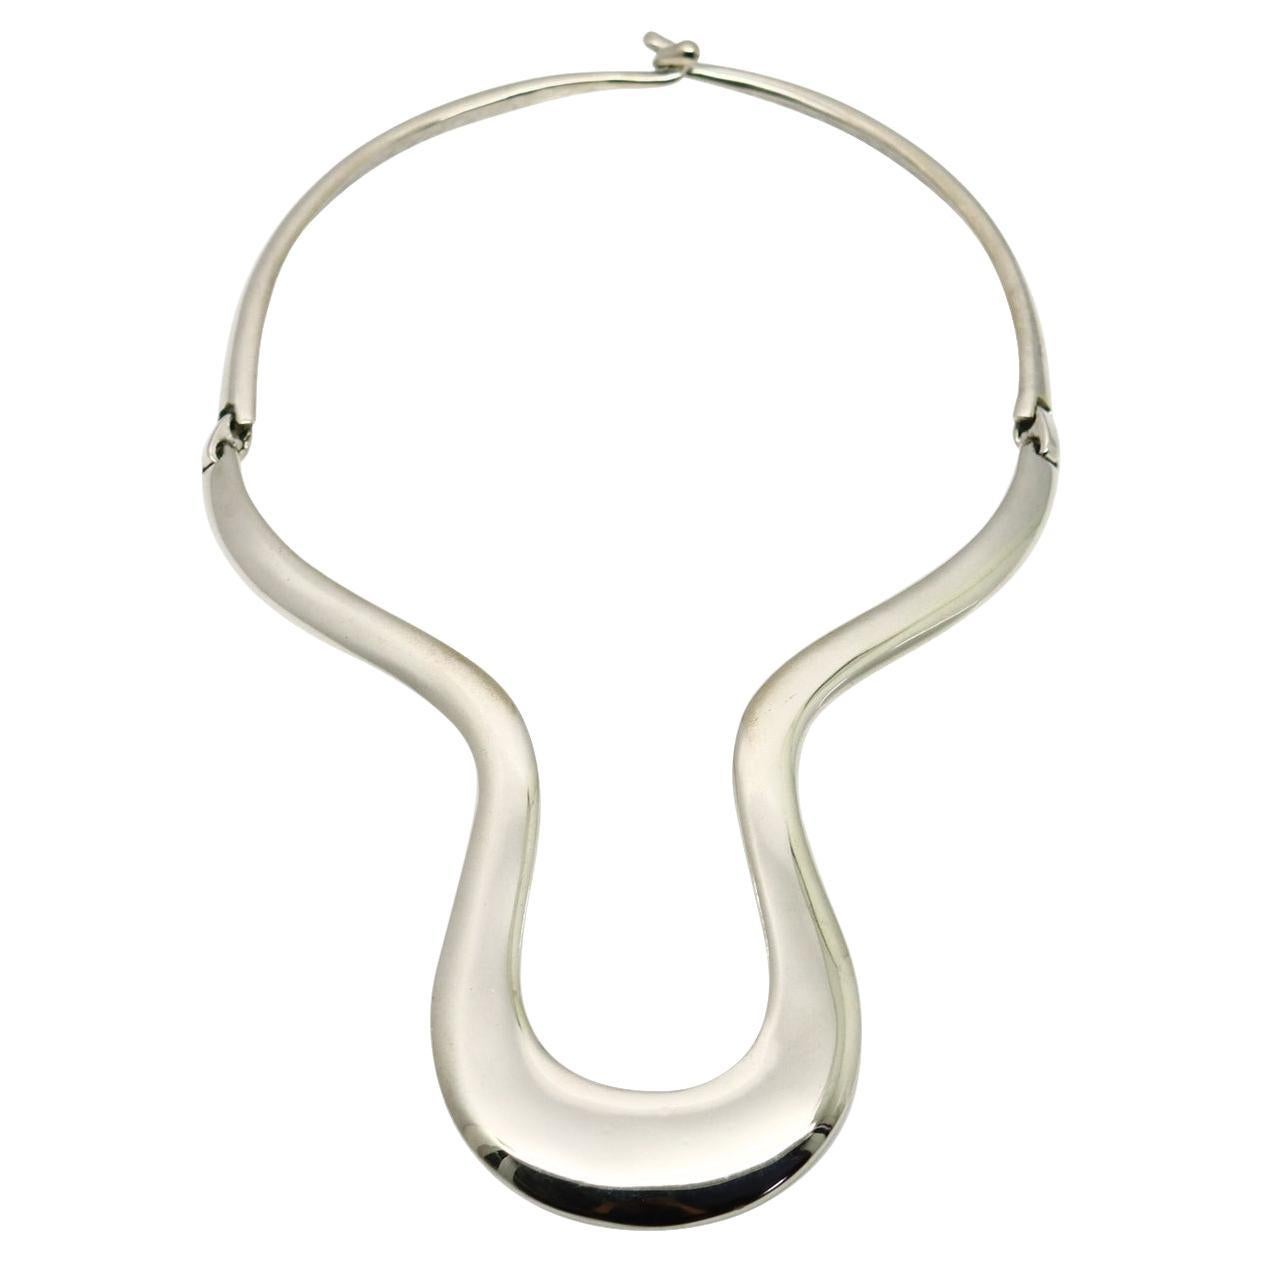 Vintage Alexis Kirk Articulated Silver Tone Choker Necklace Circa 1980s